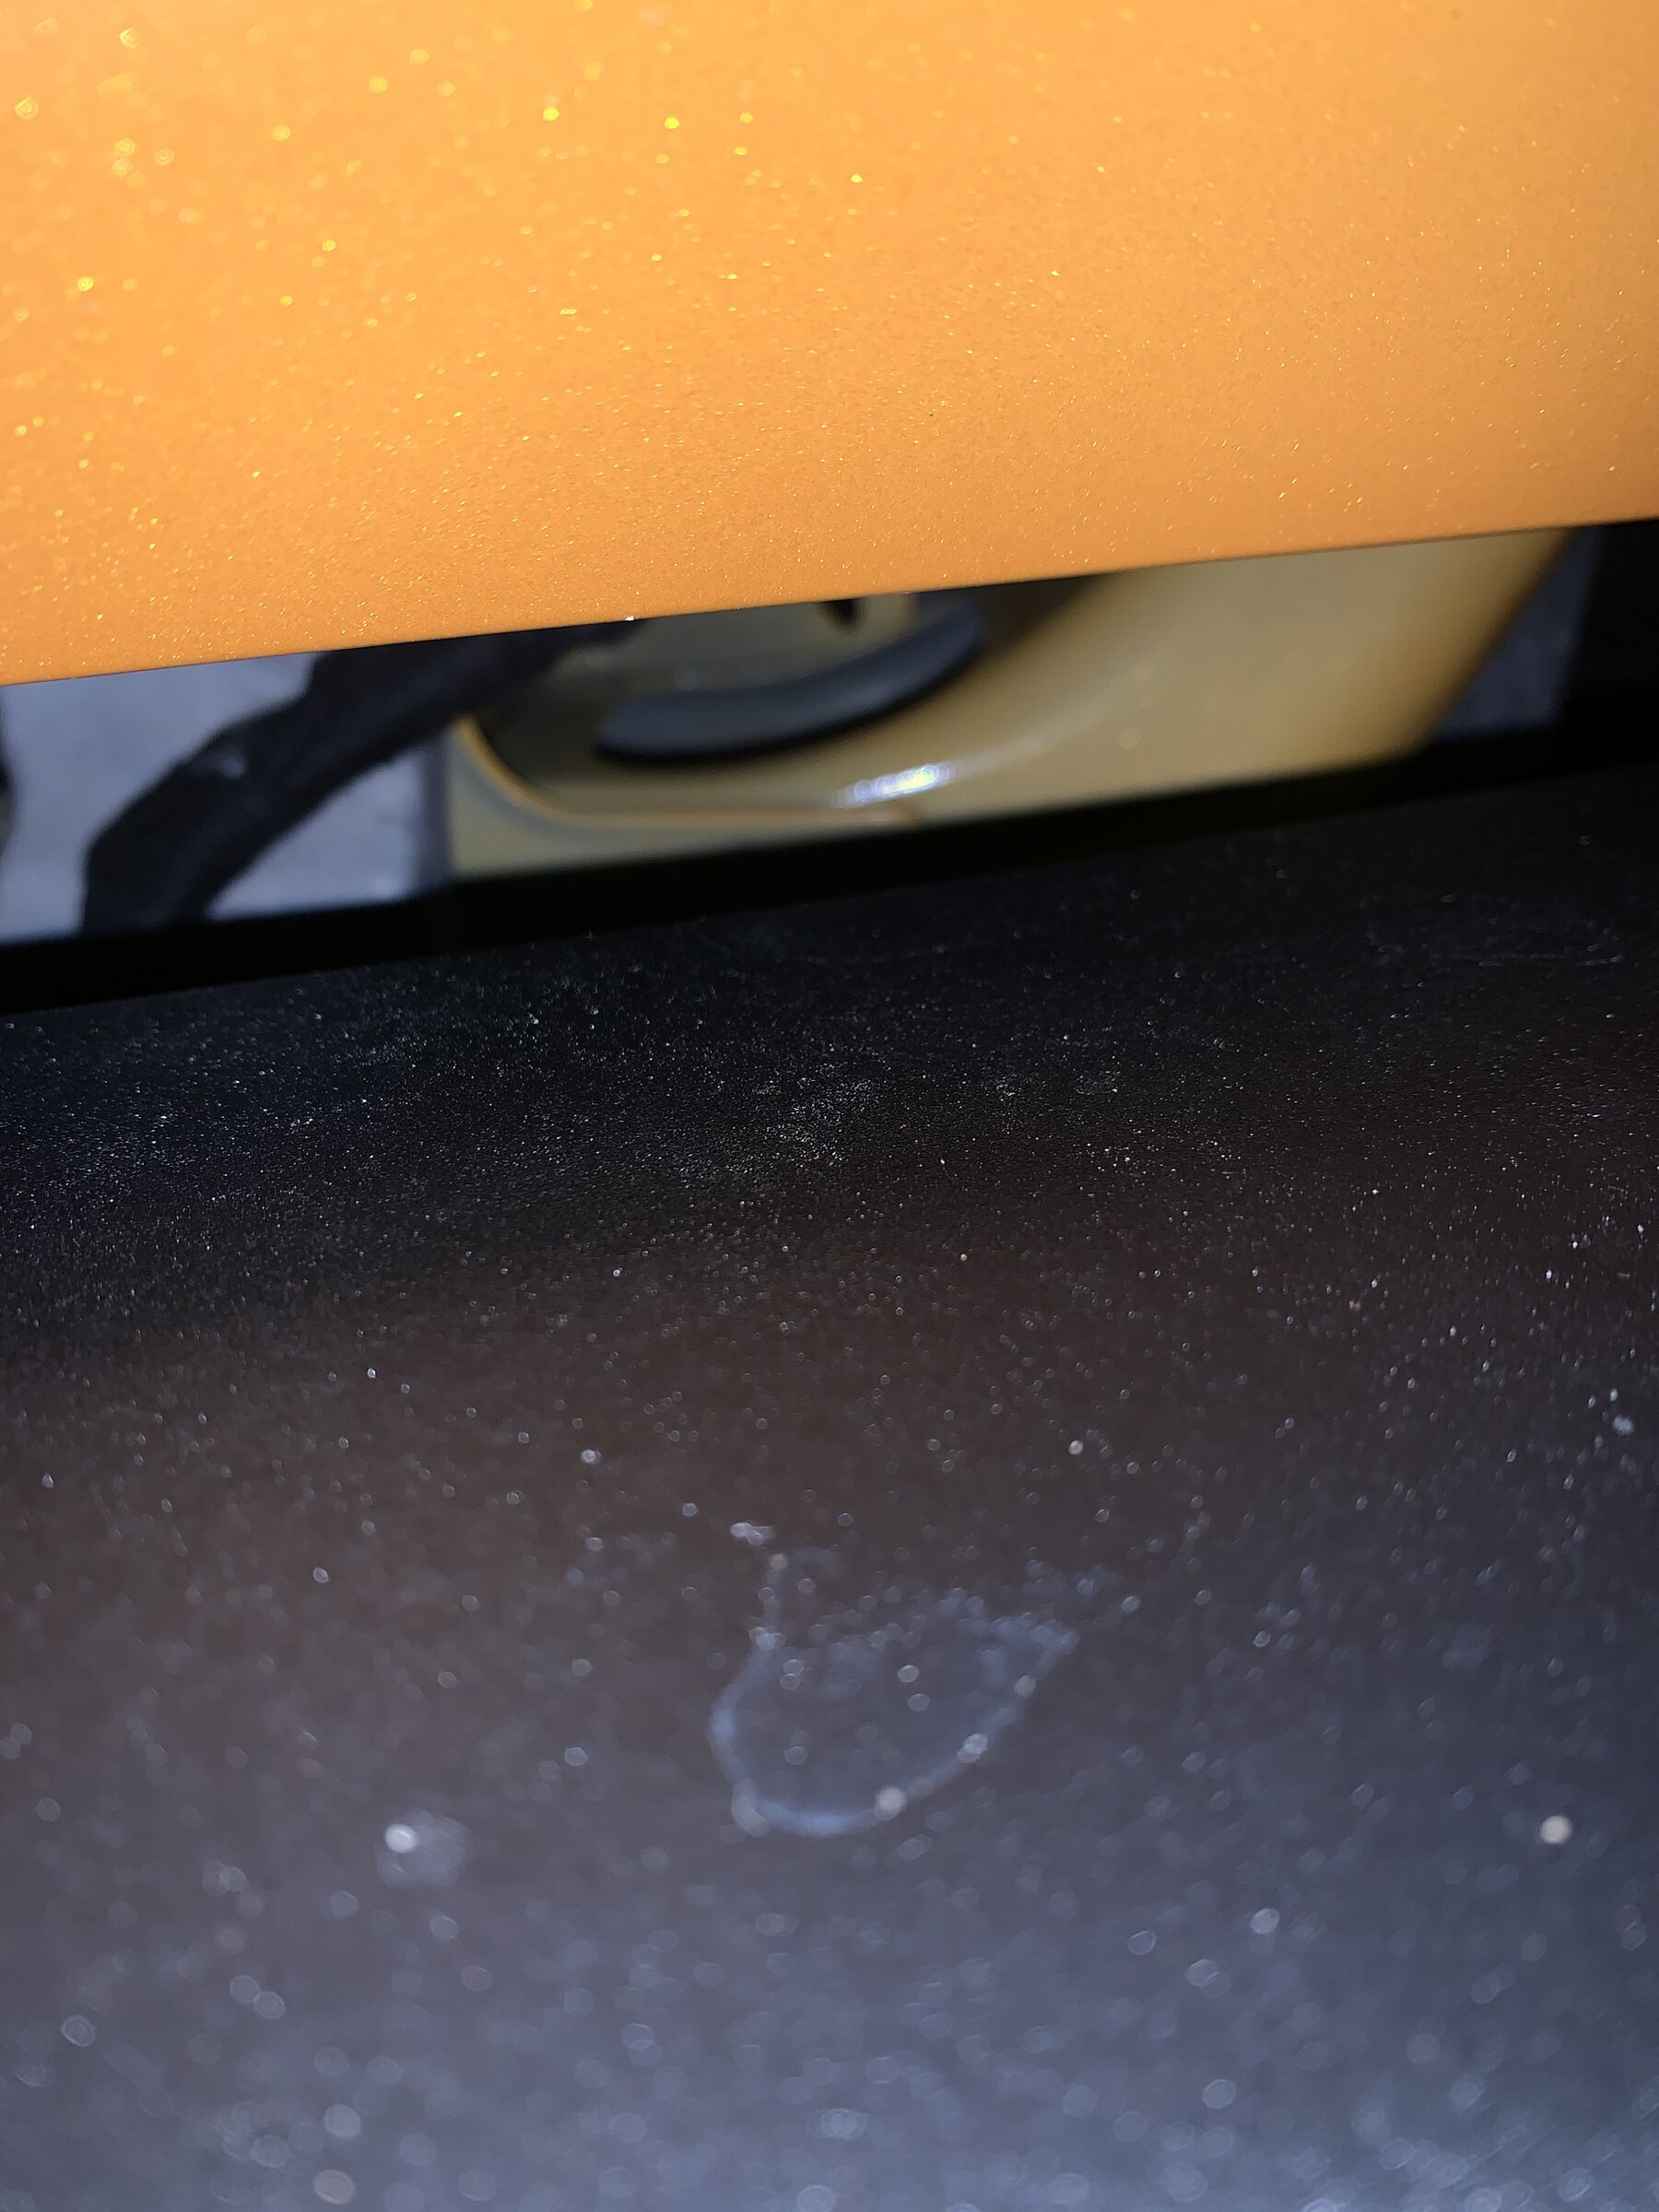 Ford Bronco Is this area’s paint unfinished or is it normal? D1BA9B0C-13E0-40D1-AEF8-89BD6E3246AE